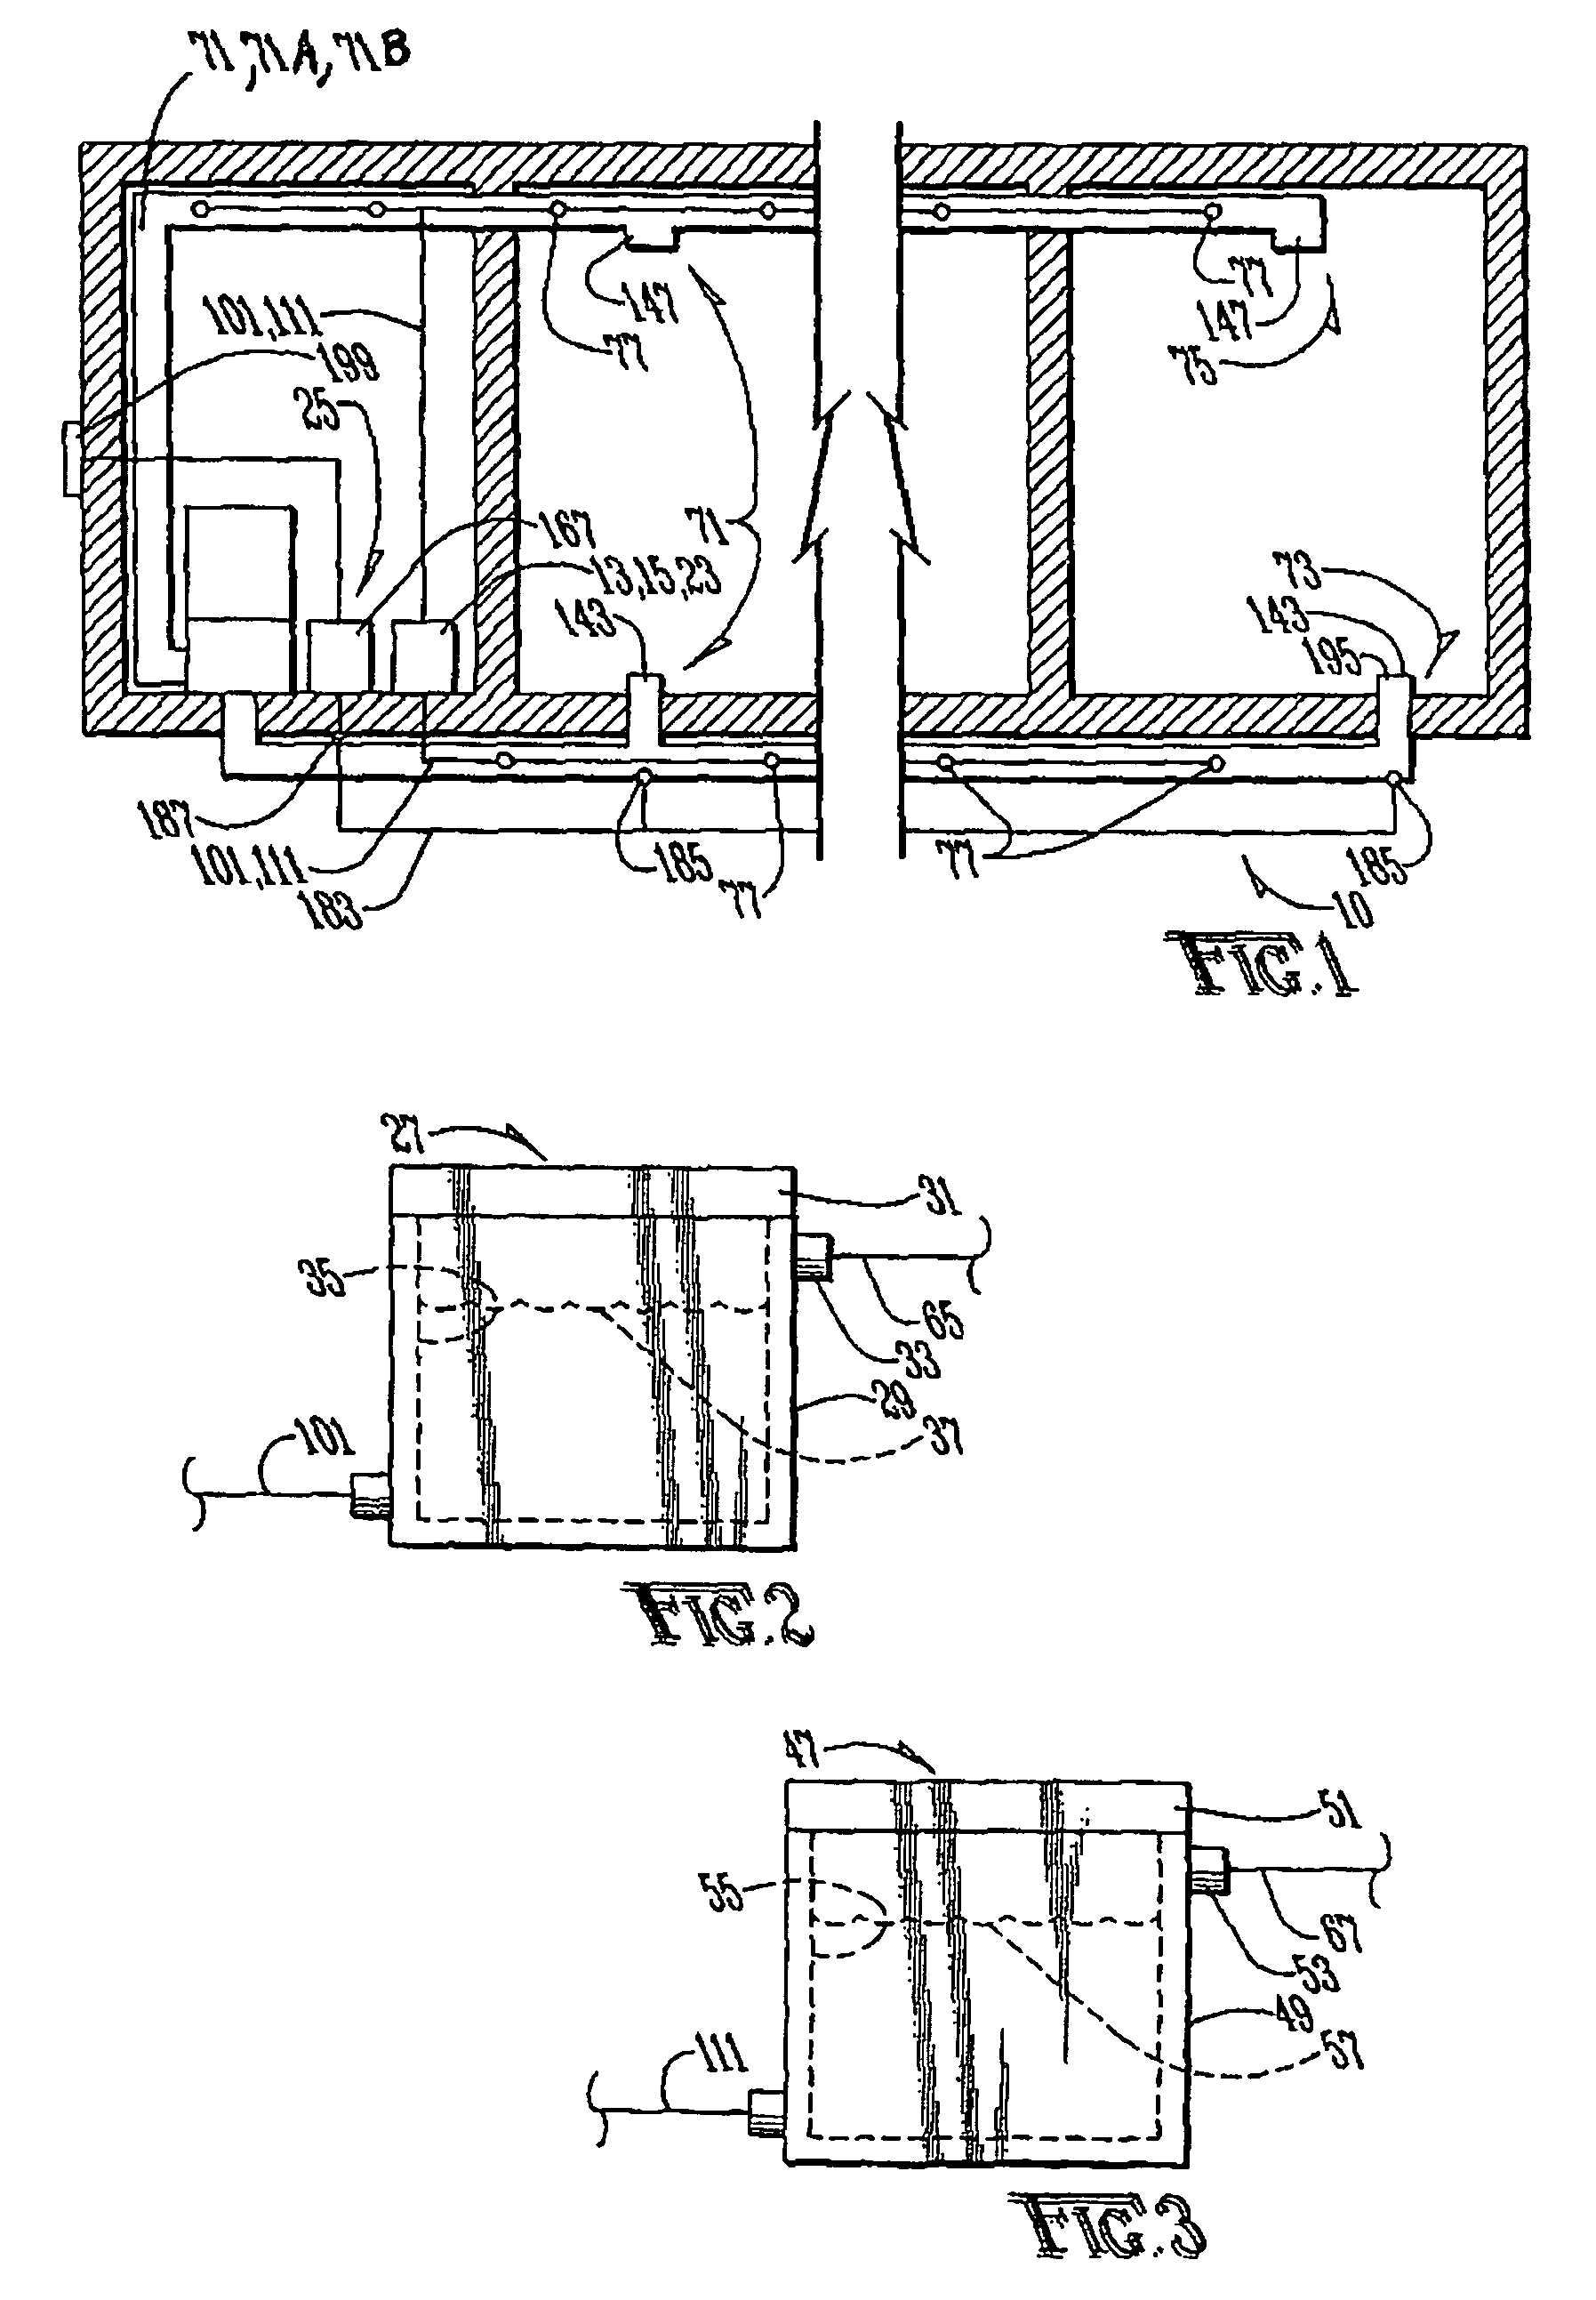 Apparatus and method for cleaning and decontaminating an air distribution system